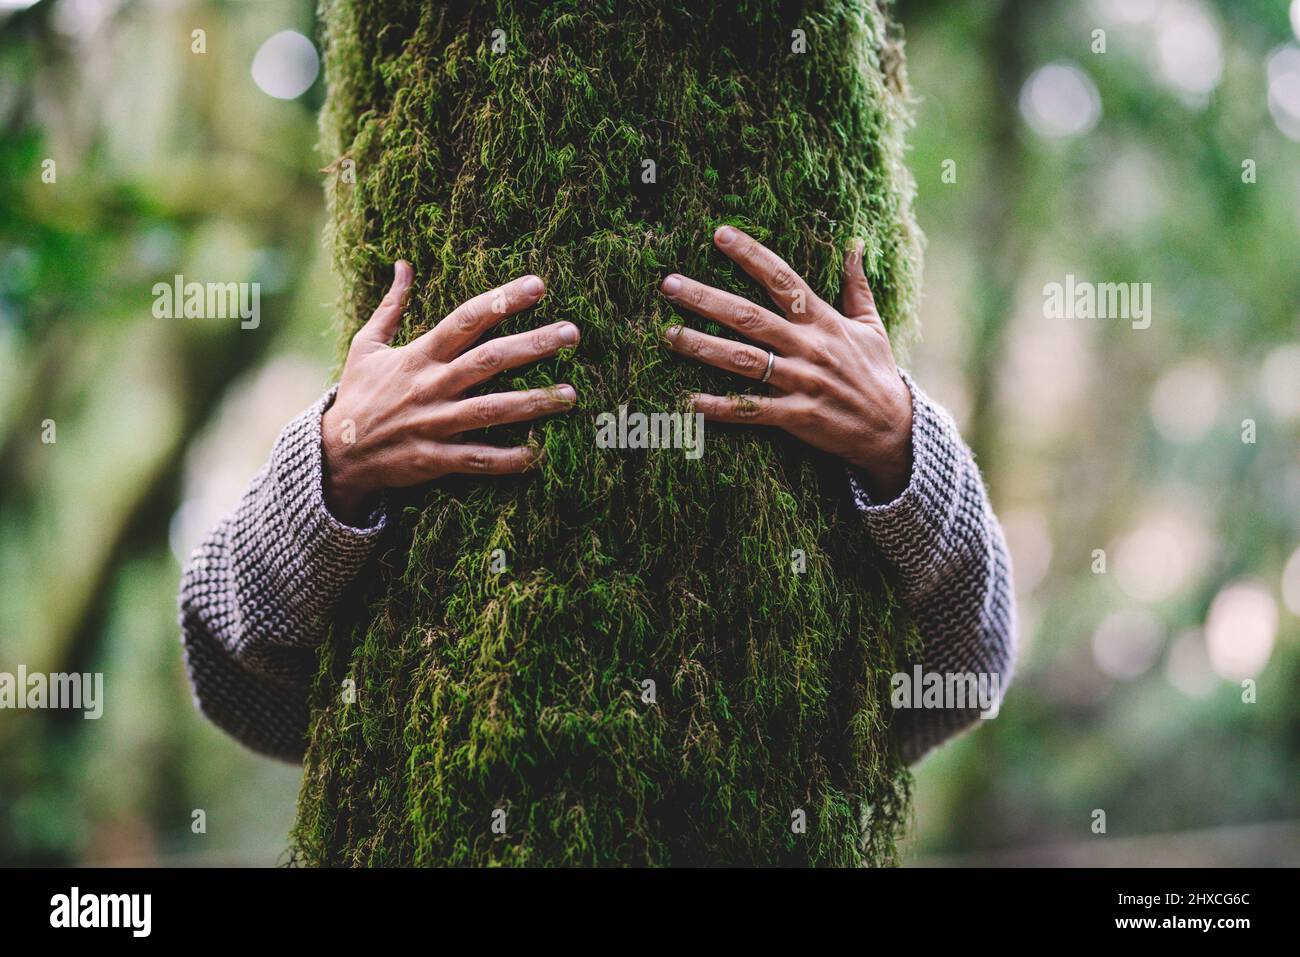 Nature lover hugs tree trunk with green moss in tropical forests, Stock Photo